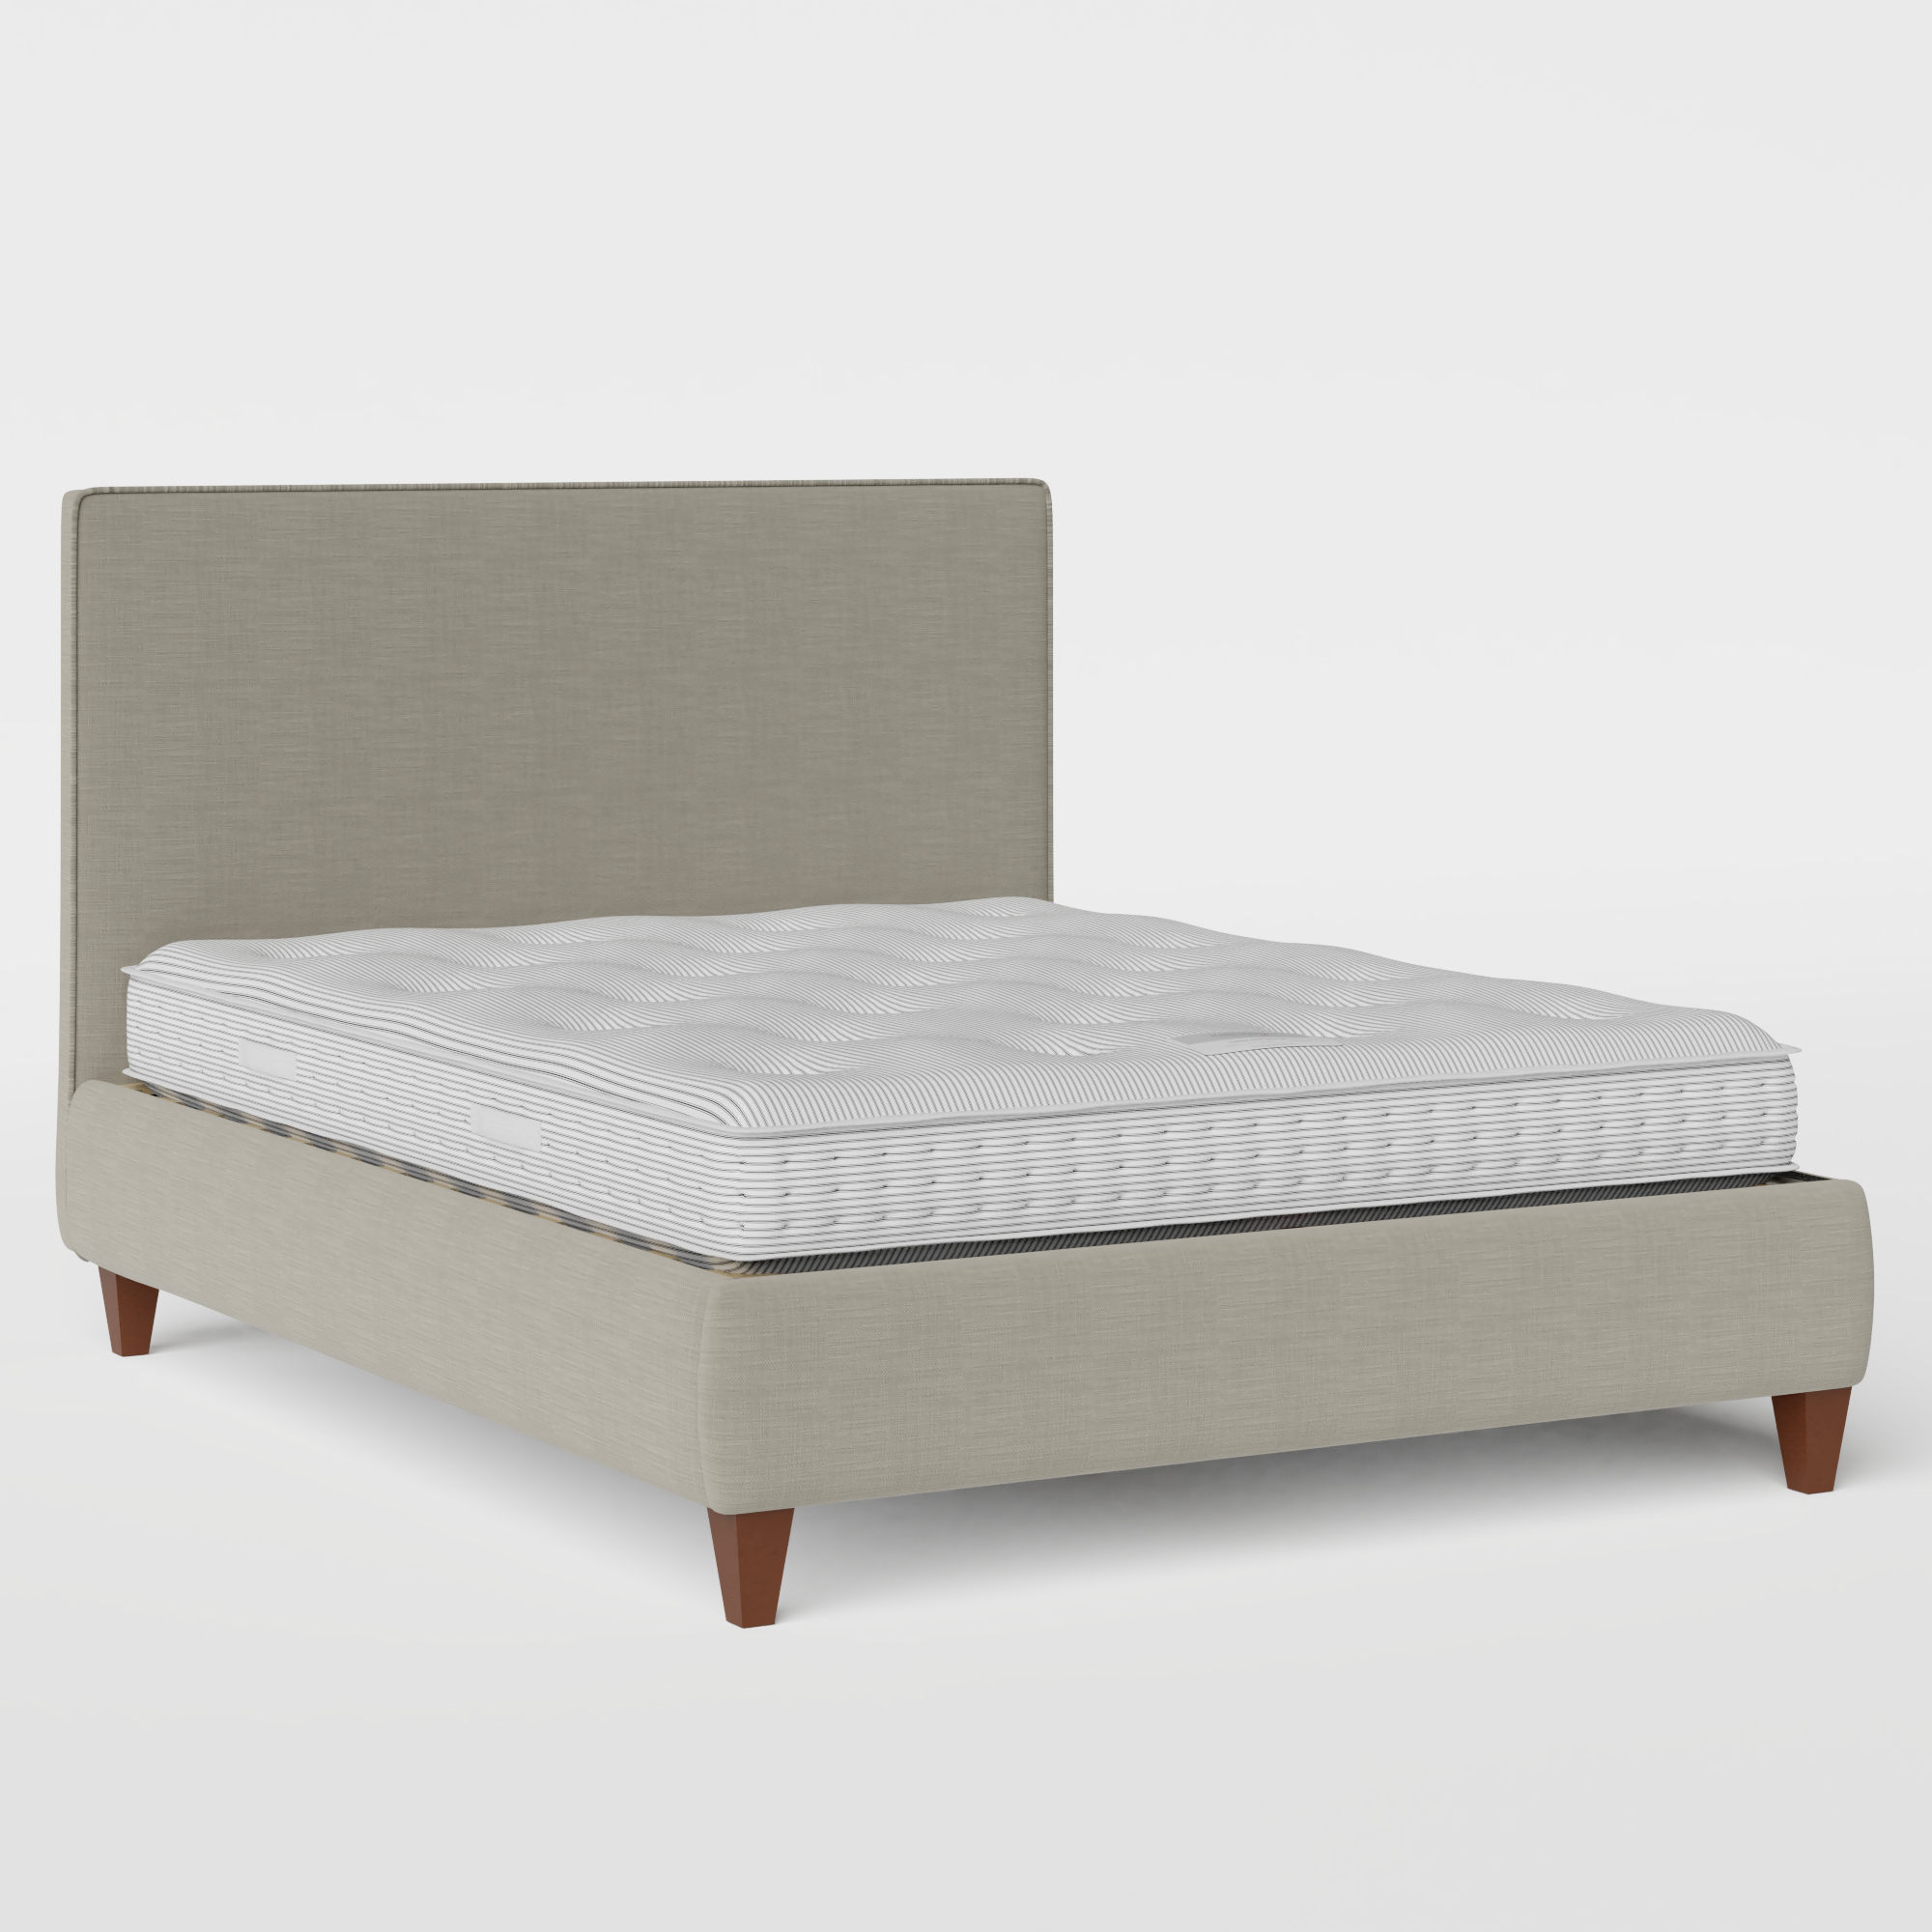 Yushan with Piping stoffen bed in grijs